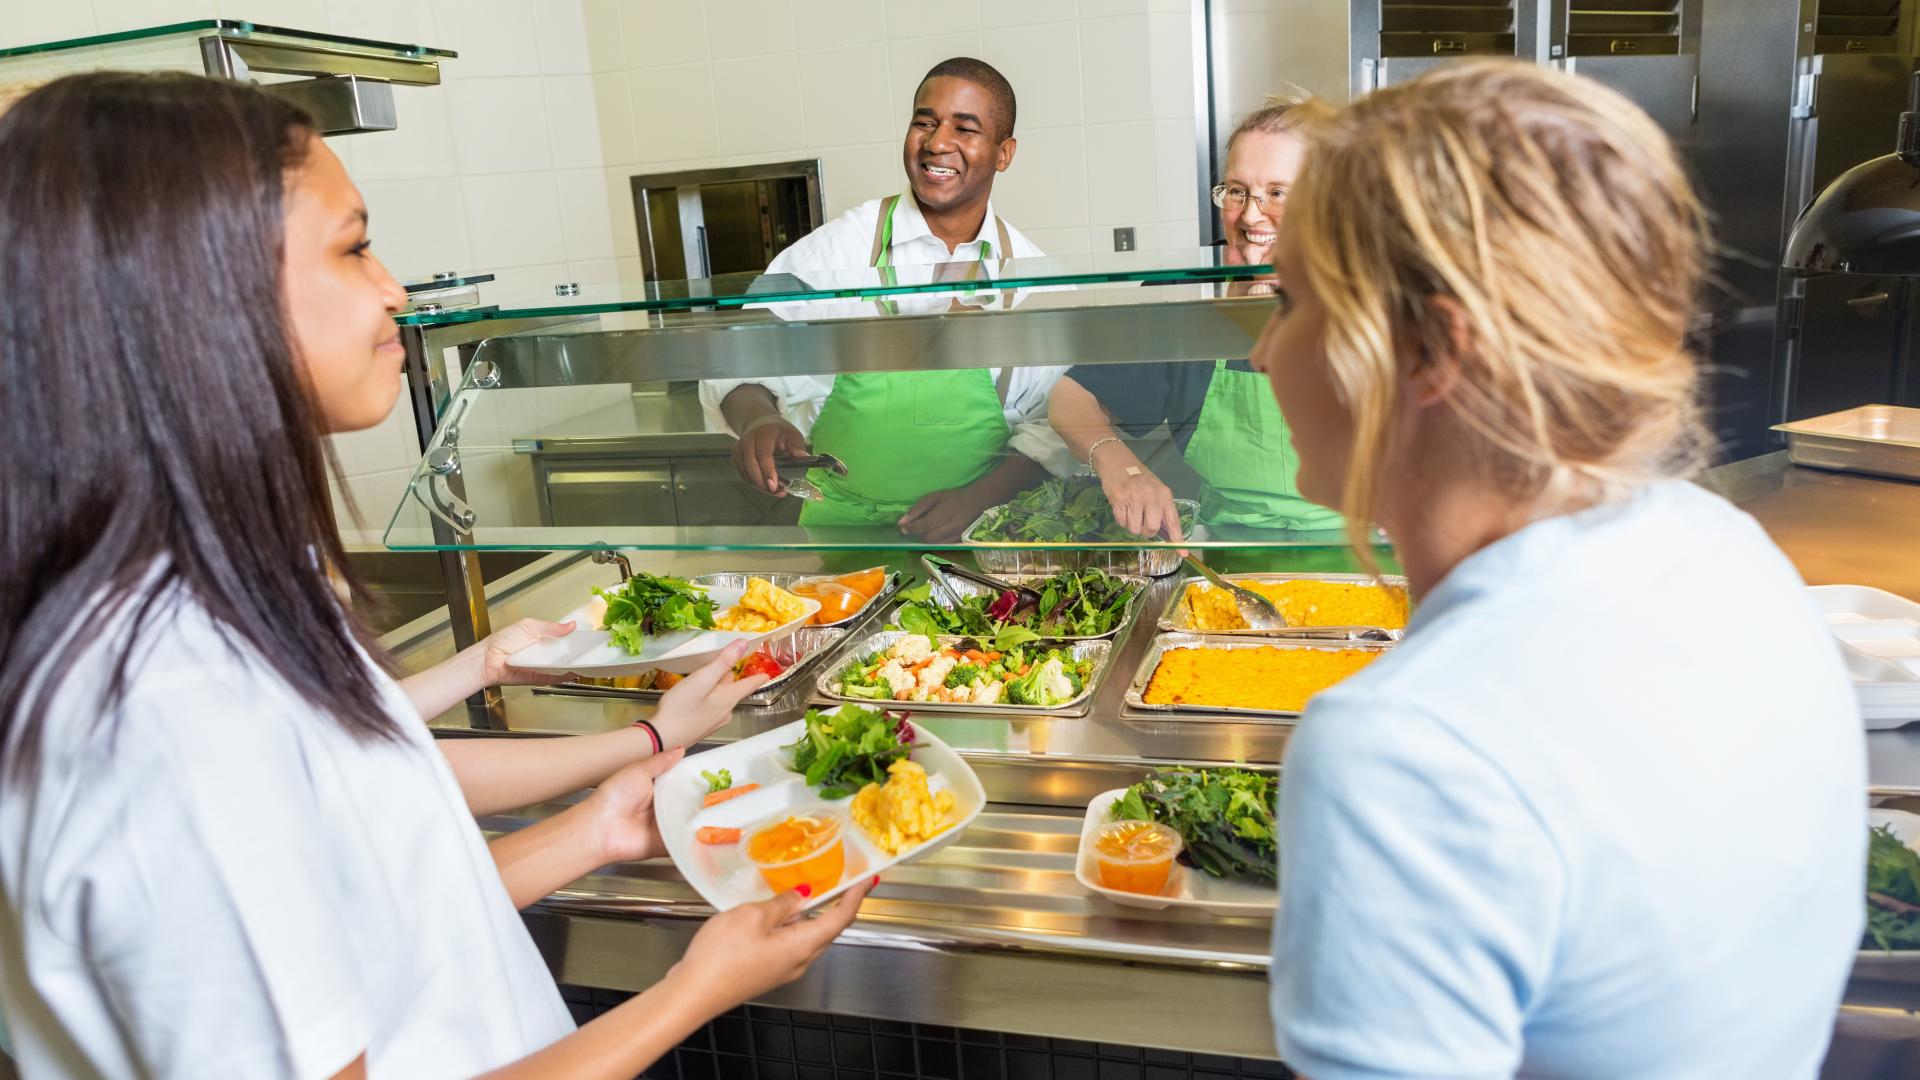 Students being served in a university canteen